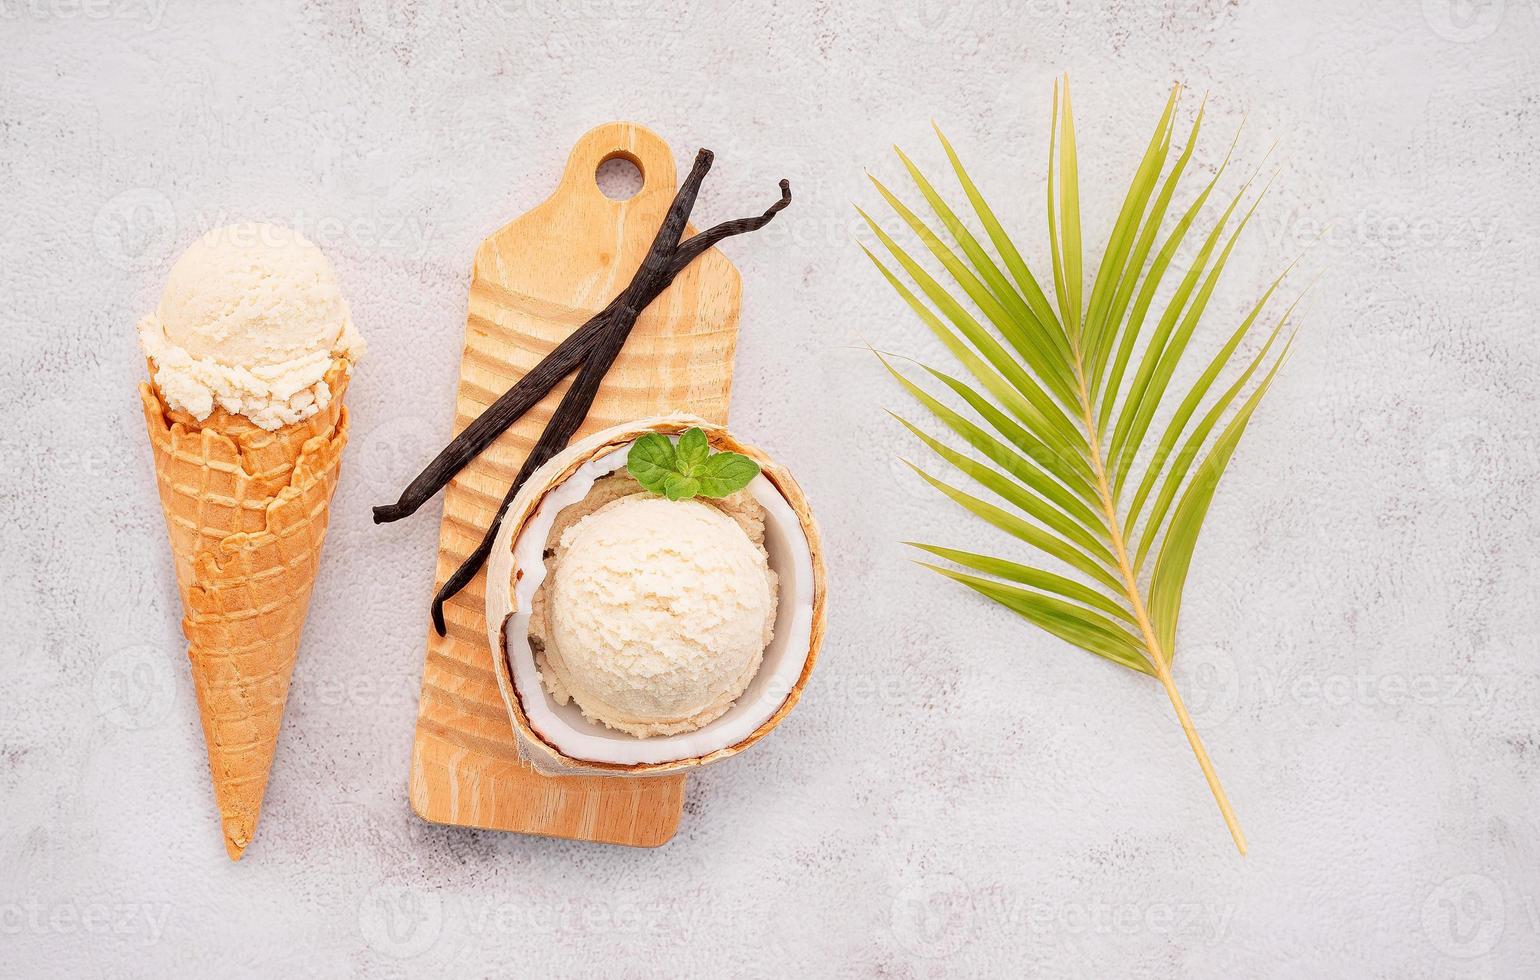 Coconut ice cream flavours in half of coconut setup on white stone background. Summer and Sweet menu concept. photo